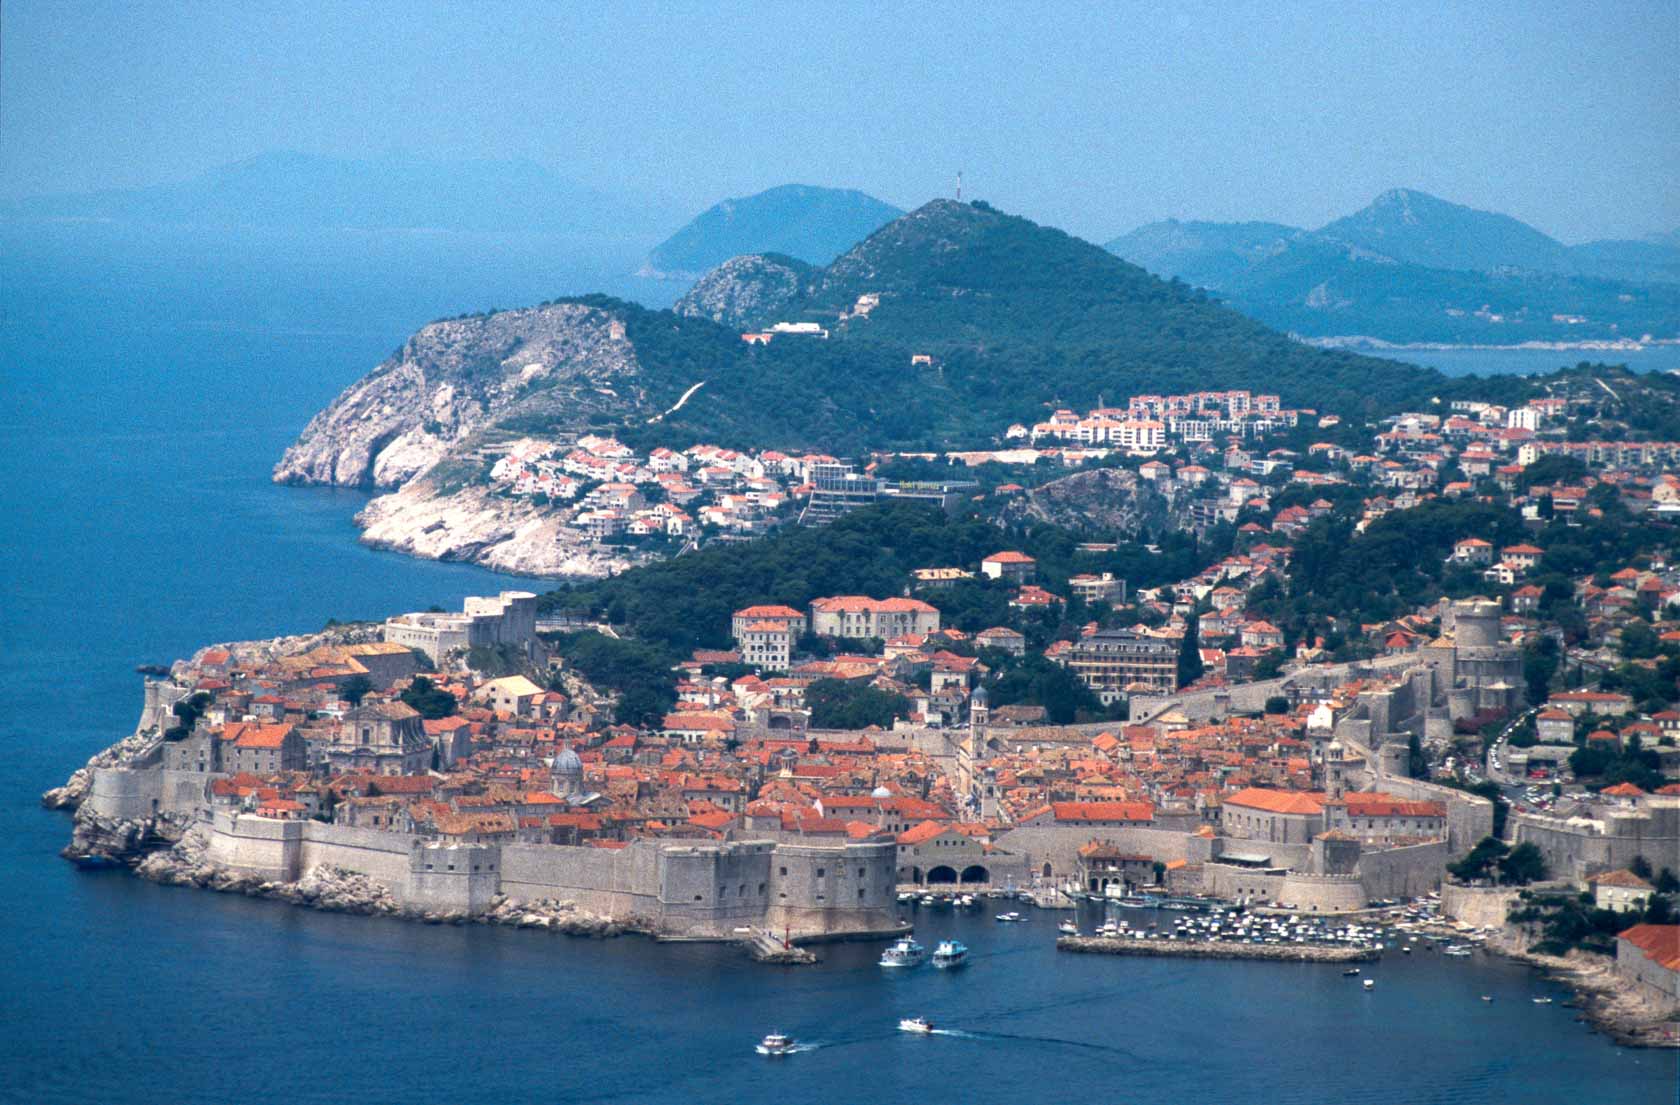 <span style="font-family: Verdana; font-size: 16px; color:">Dubrovnik, oude stad</span>